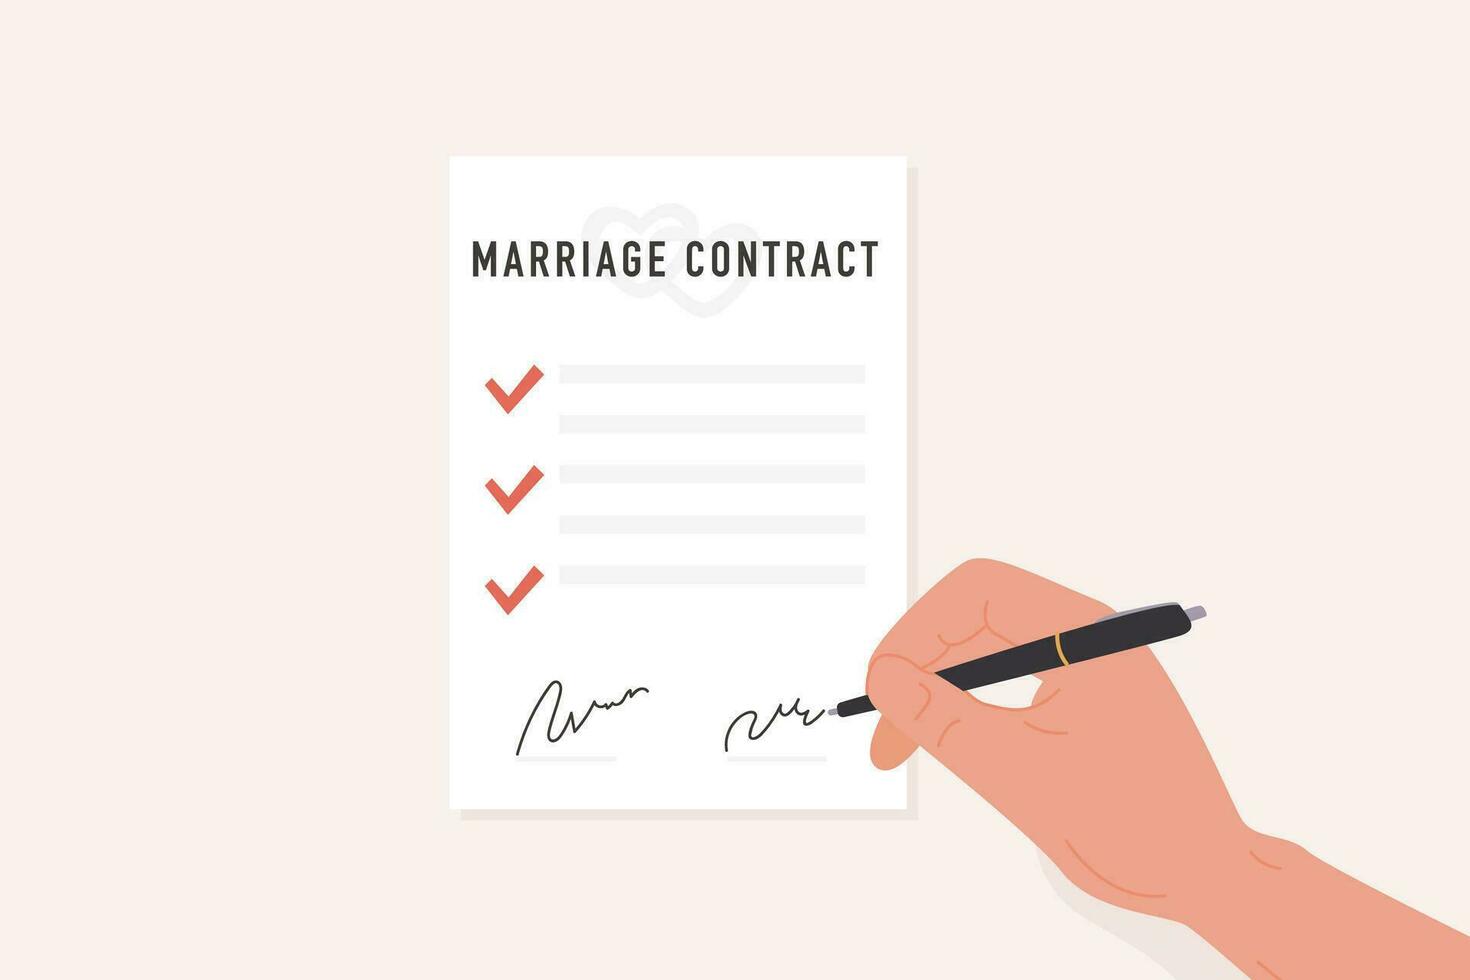 A person hand with pen signing marriage contract flat style illustration. Prenup signed certificate. Prenuptial agreement form with check marks and signatures. Divorce document. Vector illustration.